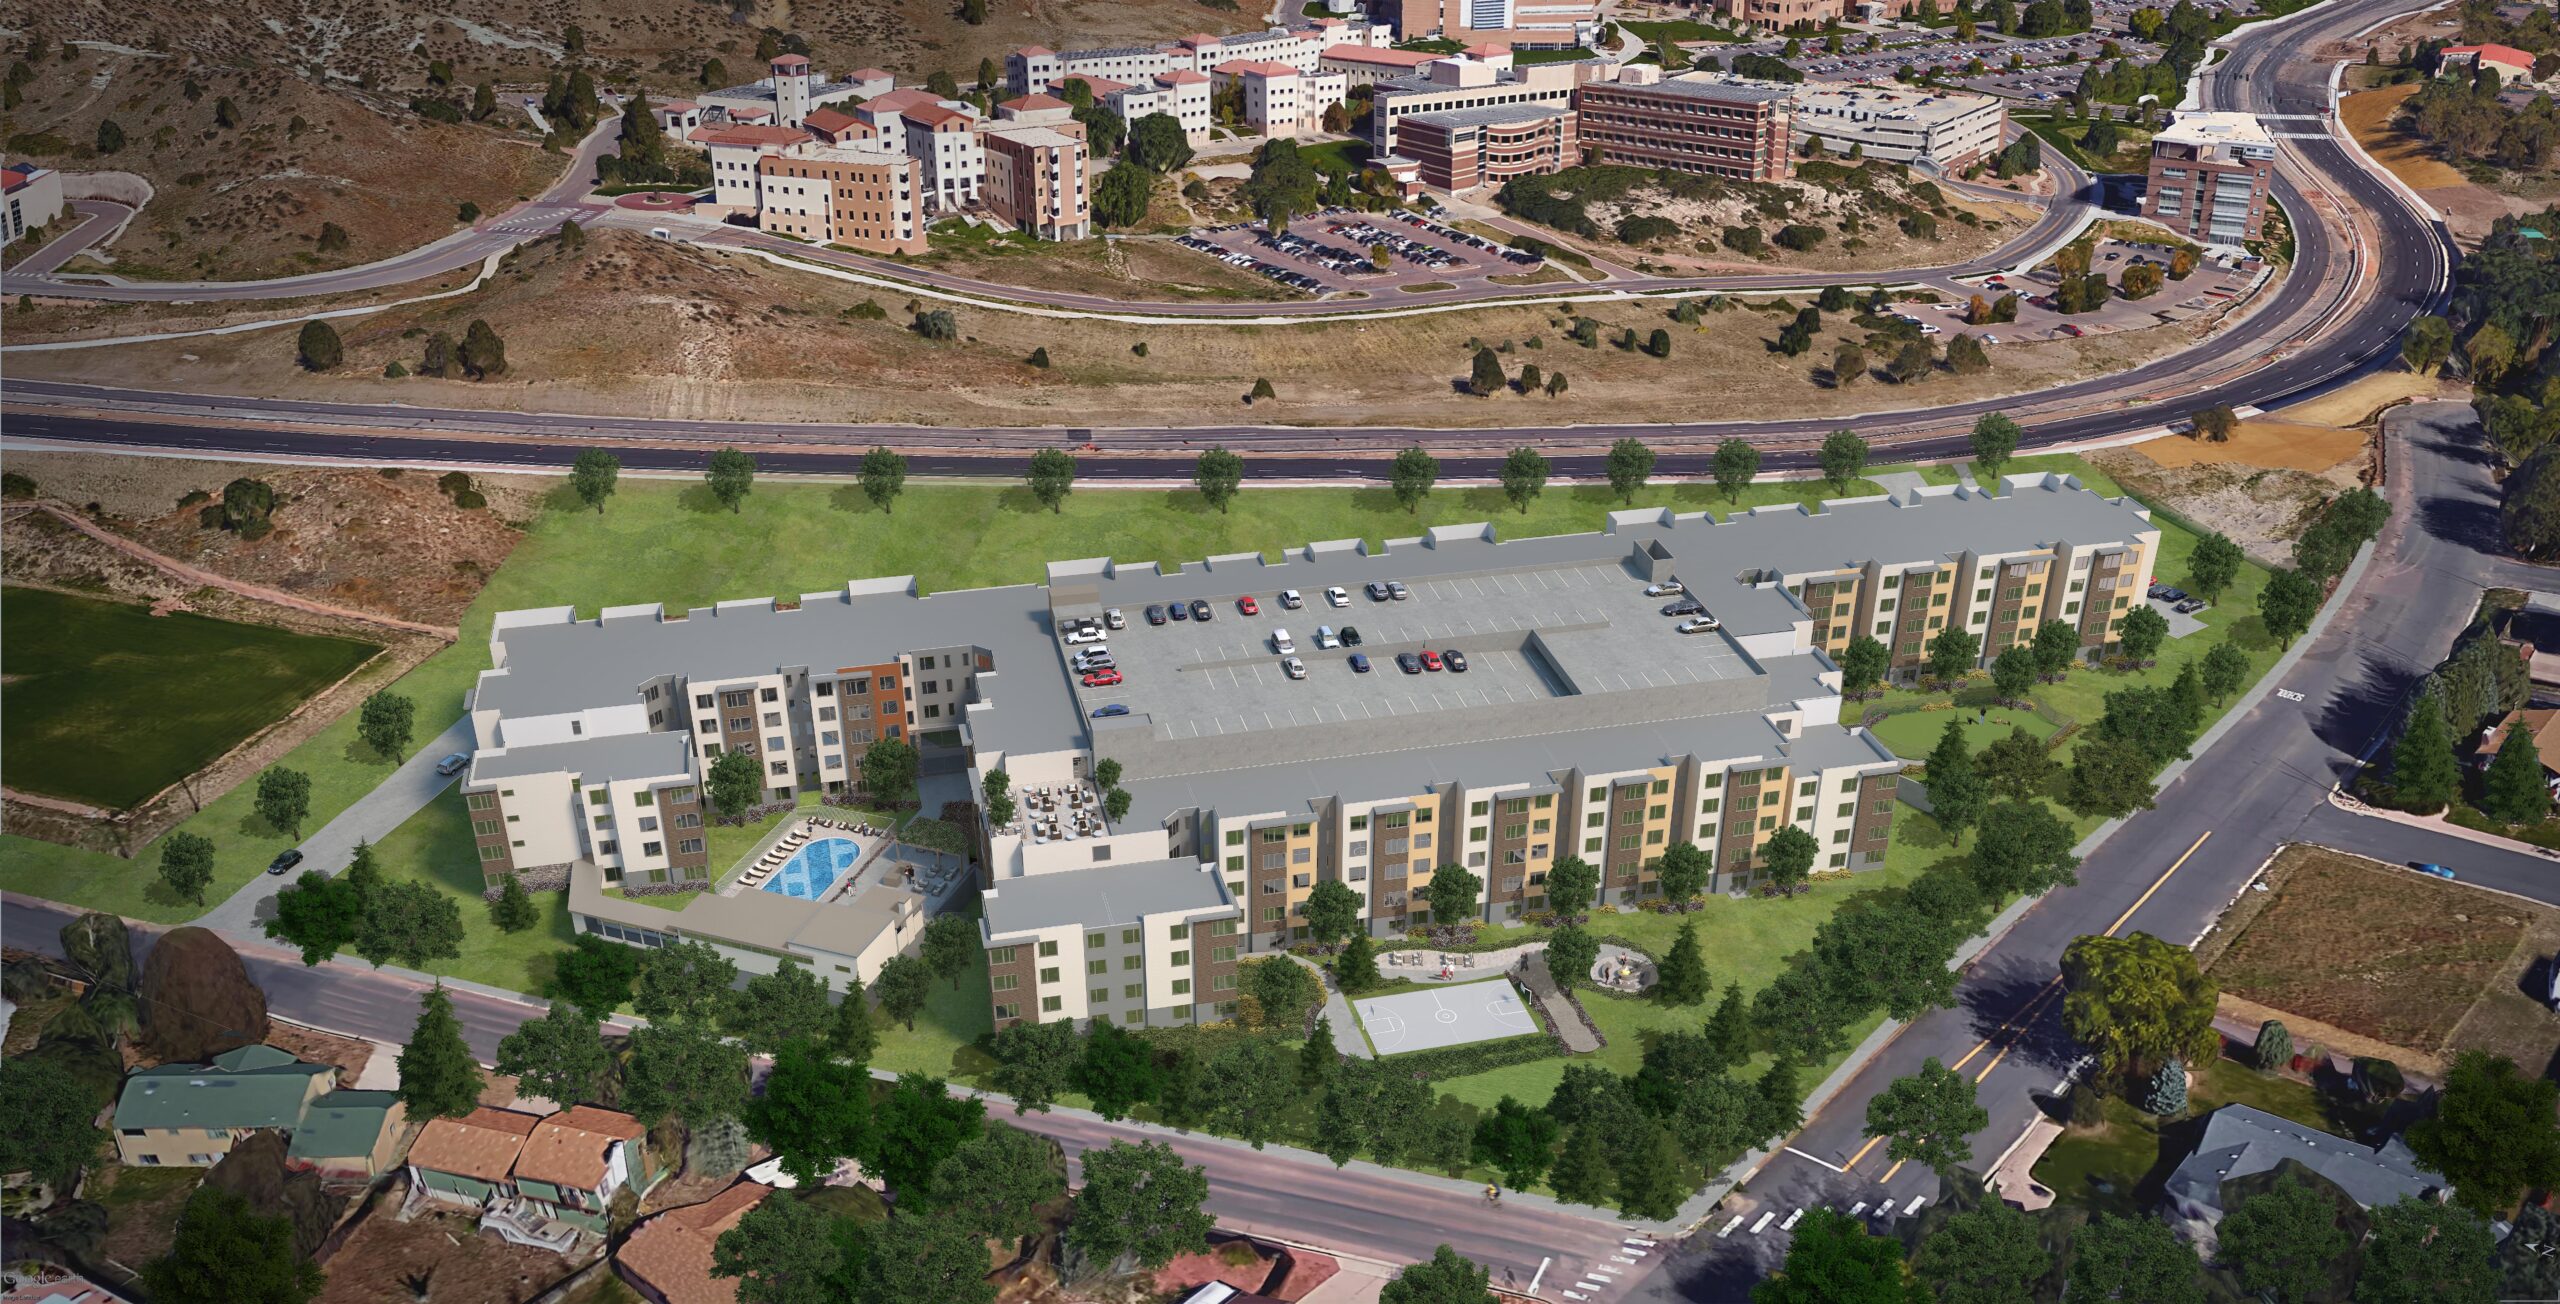 Gilbane Development Co. breaks ground on West Edge Colorado Springs, an apartment complex on a hillside.